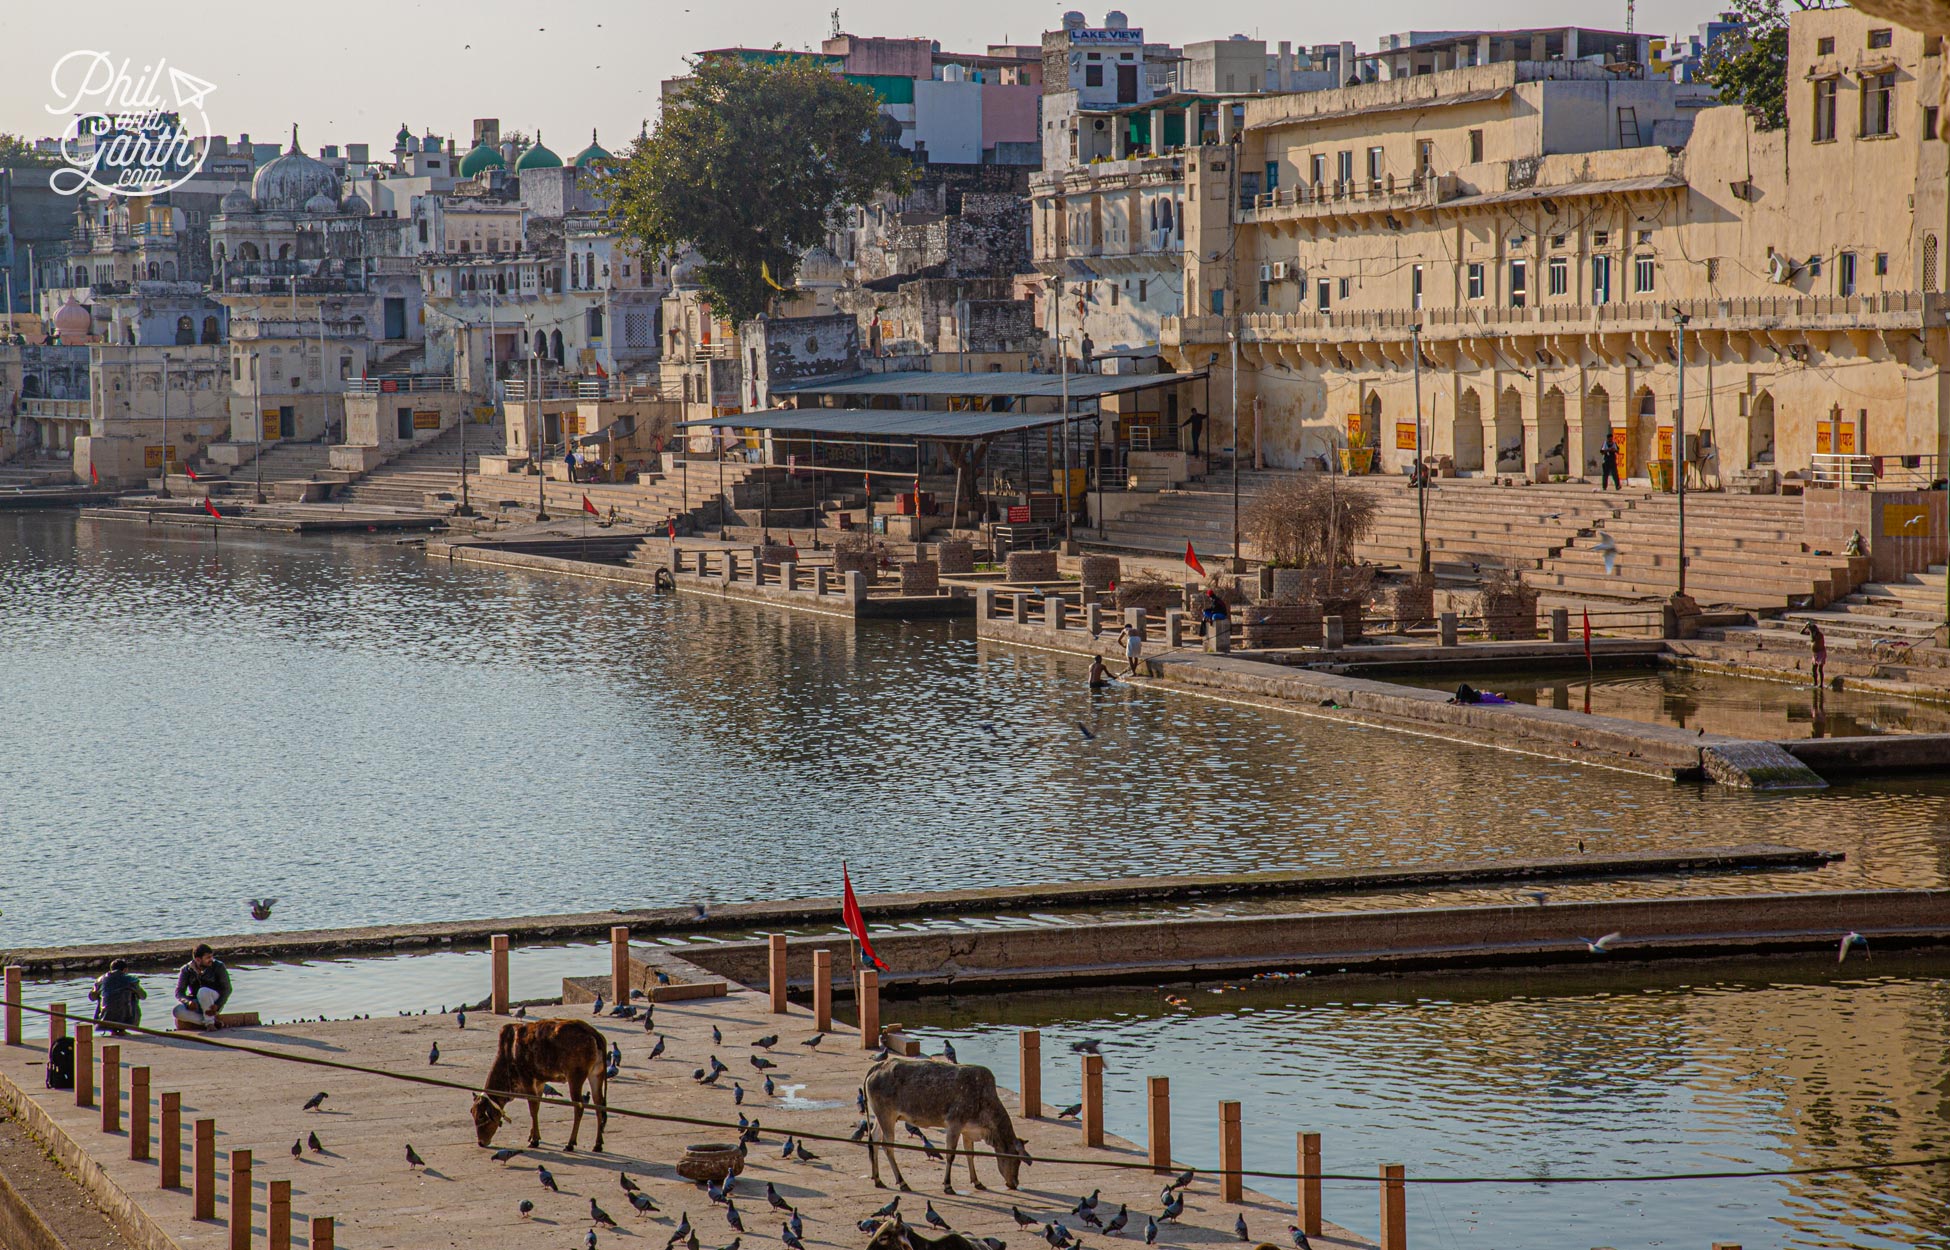 Holy cows also wander around the ghats of Pushkar, India